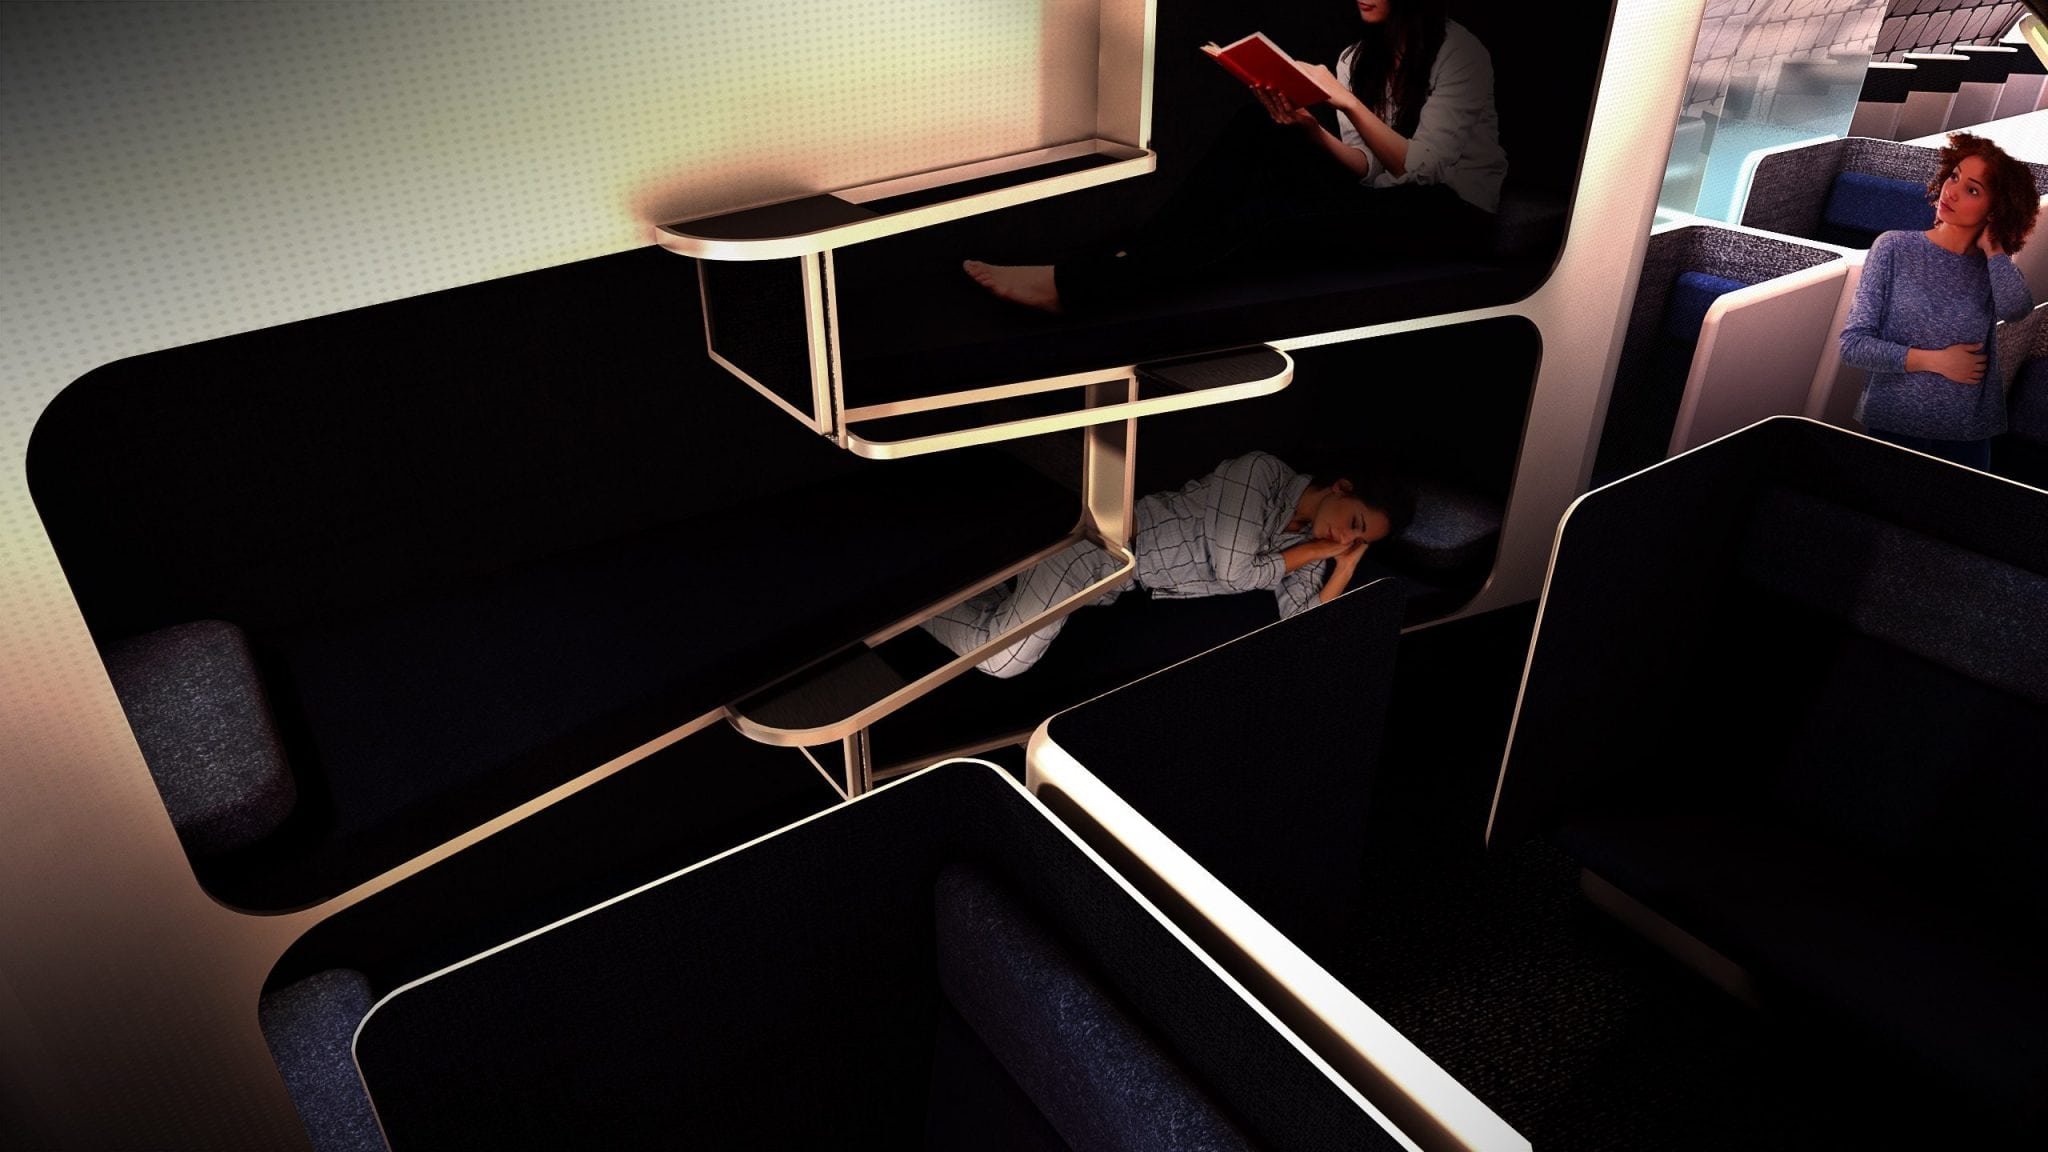 If Airbus can make modular cabins possible, an airline might be able to install sleeping pods on some longer flights, and remove them for shorter ones.